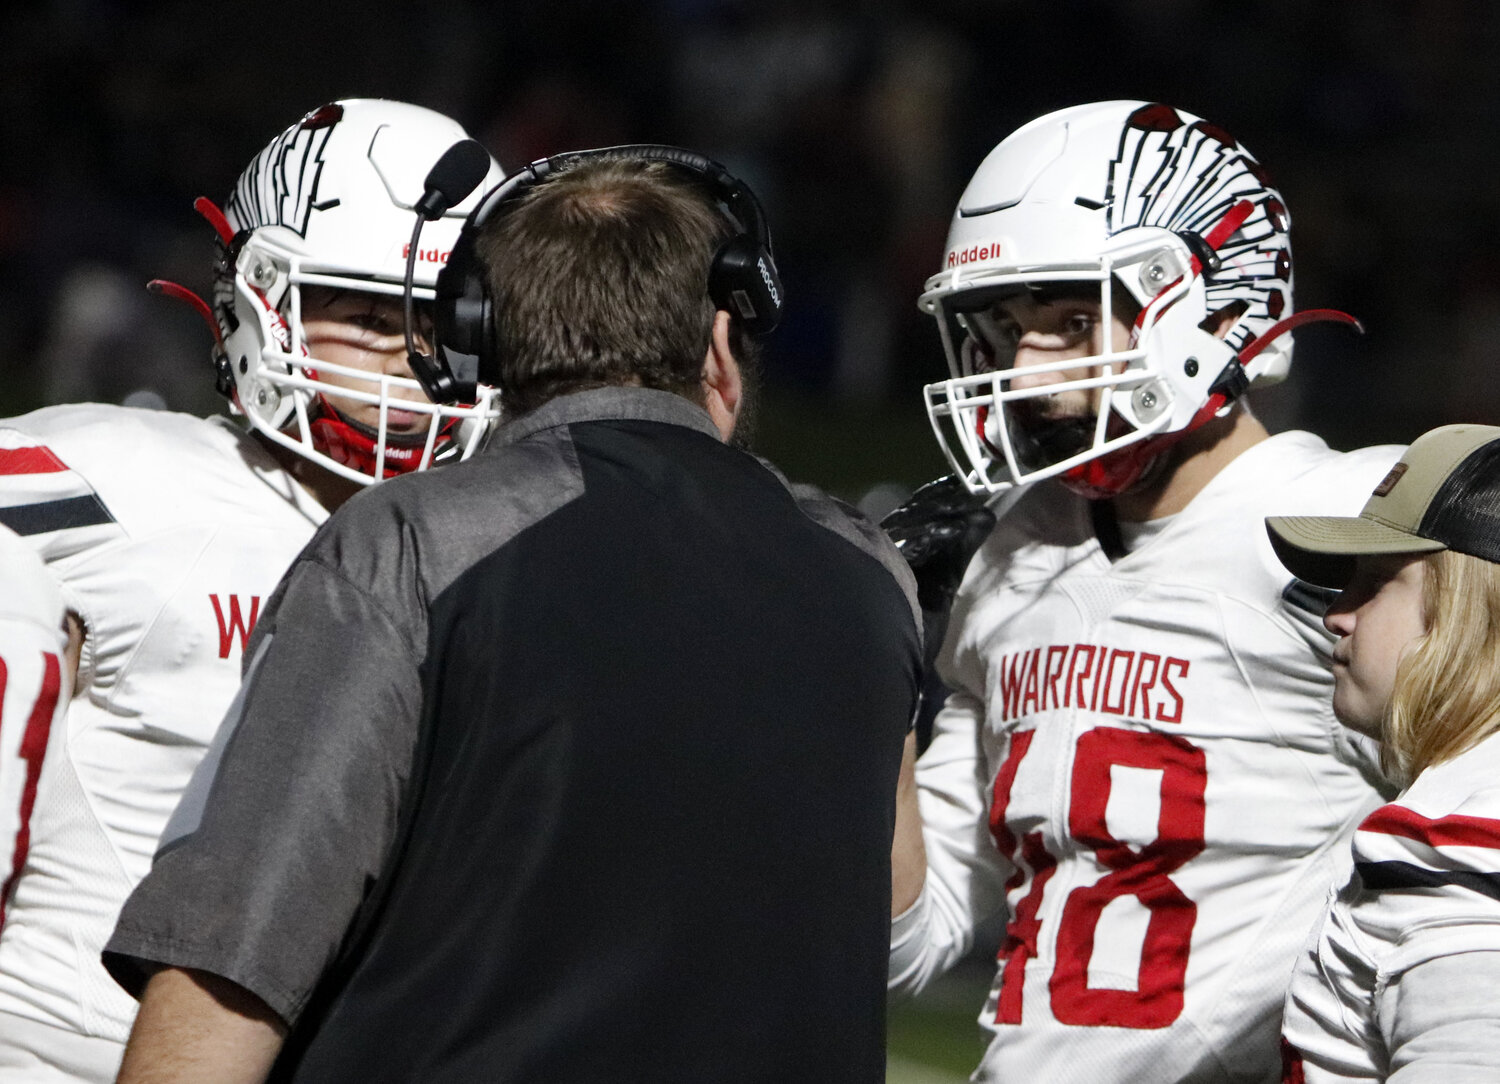 Warrenton seniors Aidan Bond and Jacob Ruff listen to Warrenton defensive coordinator John Jeskey during a timeout in the first half of Warrenton’s overtime win over Parkway North. Ruff registered one of two overtime sacks in the win.